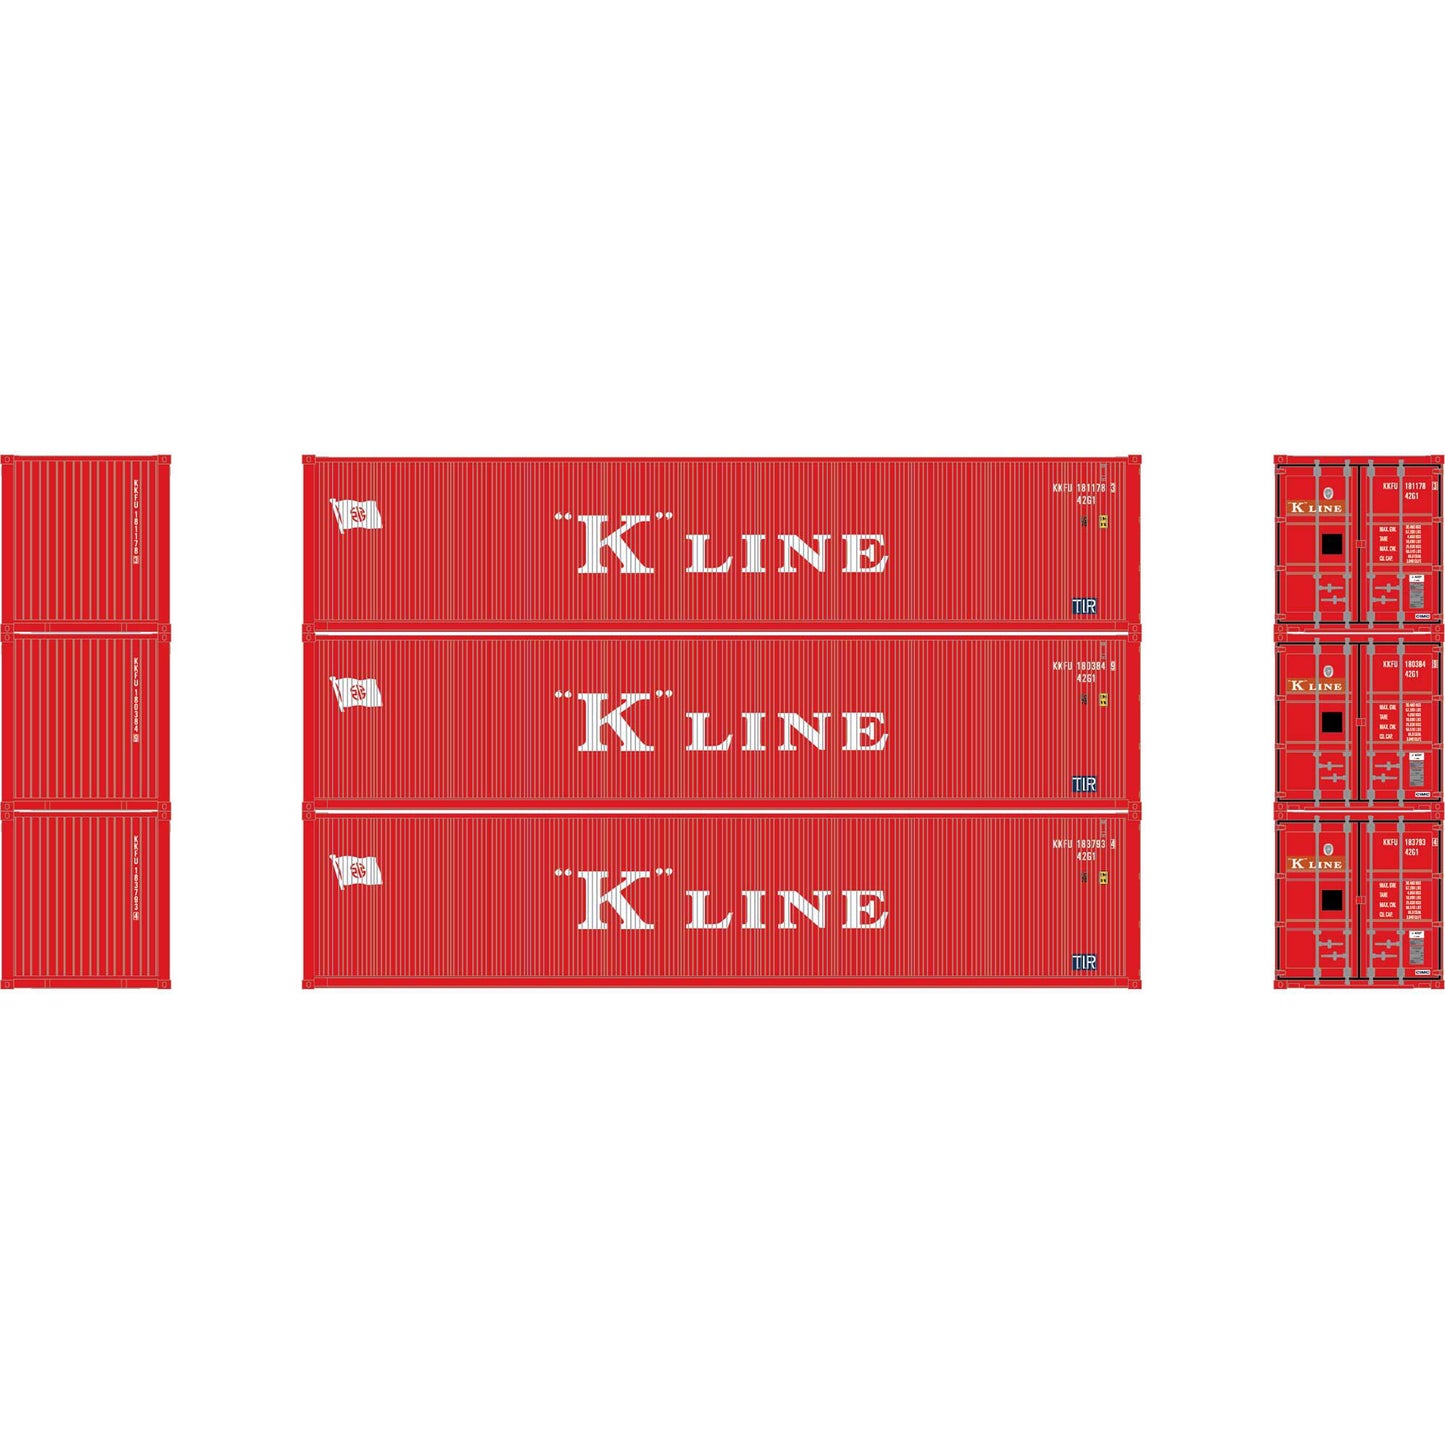 N 40' Corrugated Low-Cube Container, K Line #1 (3)